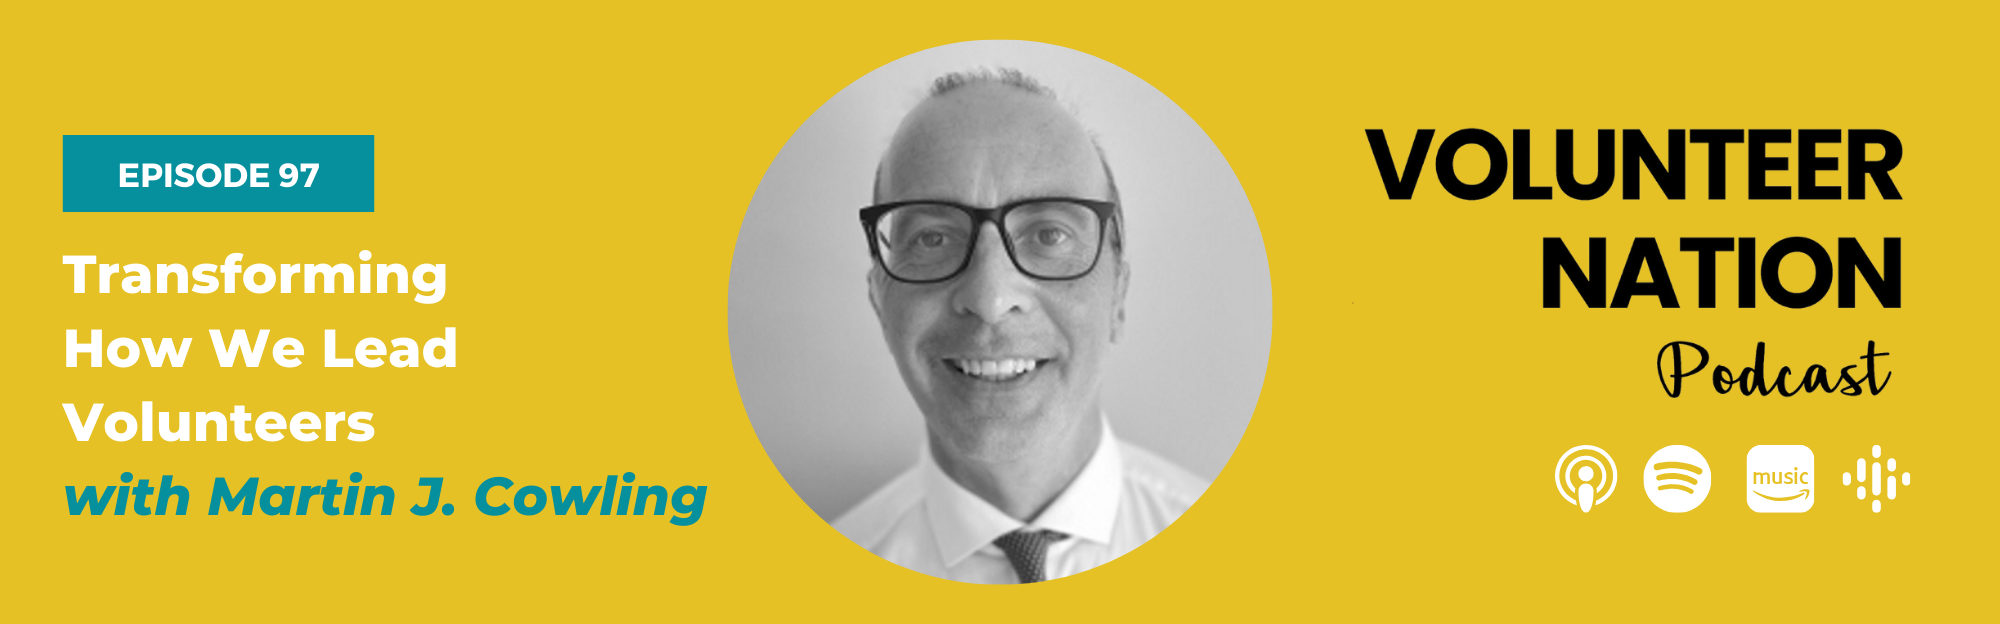 097 - Transforming How We Lead Volunteers with Martin J Cowling